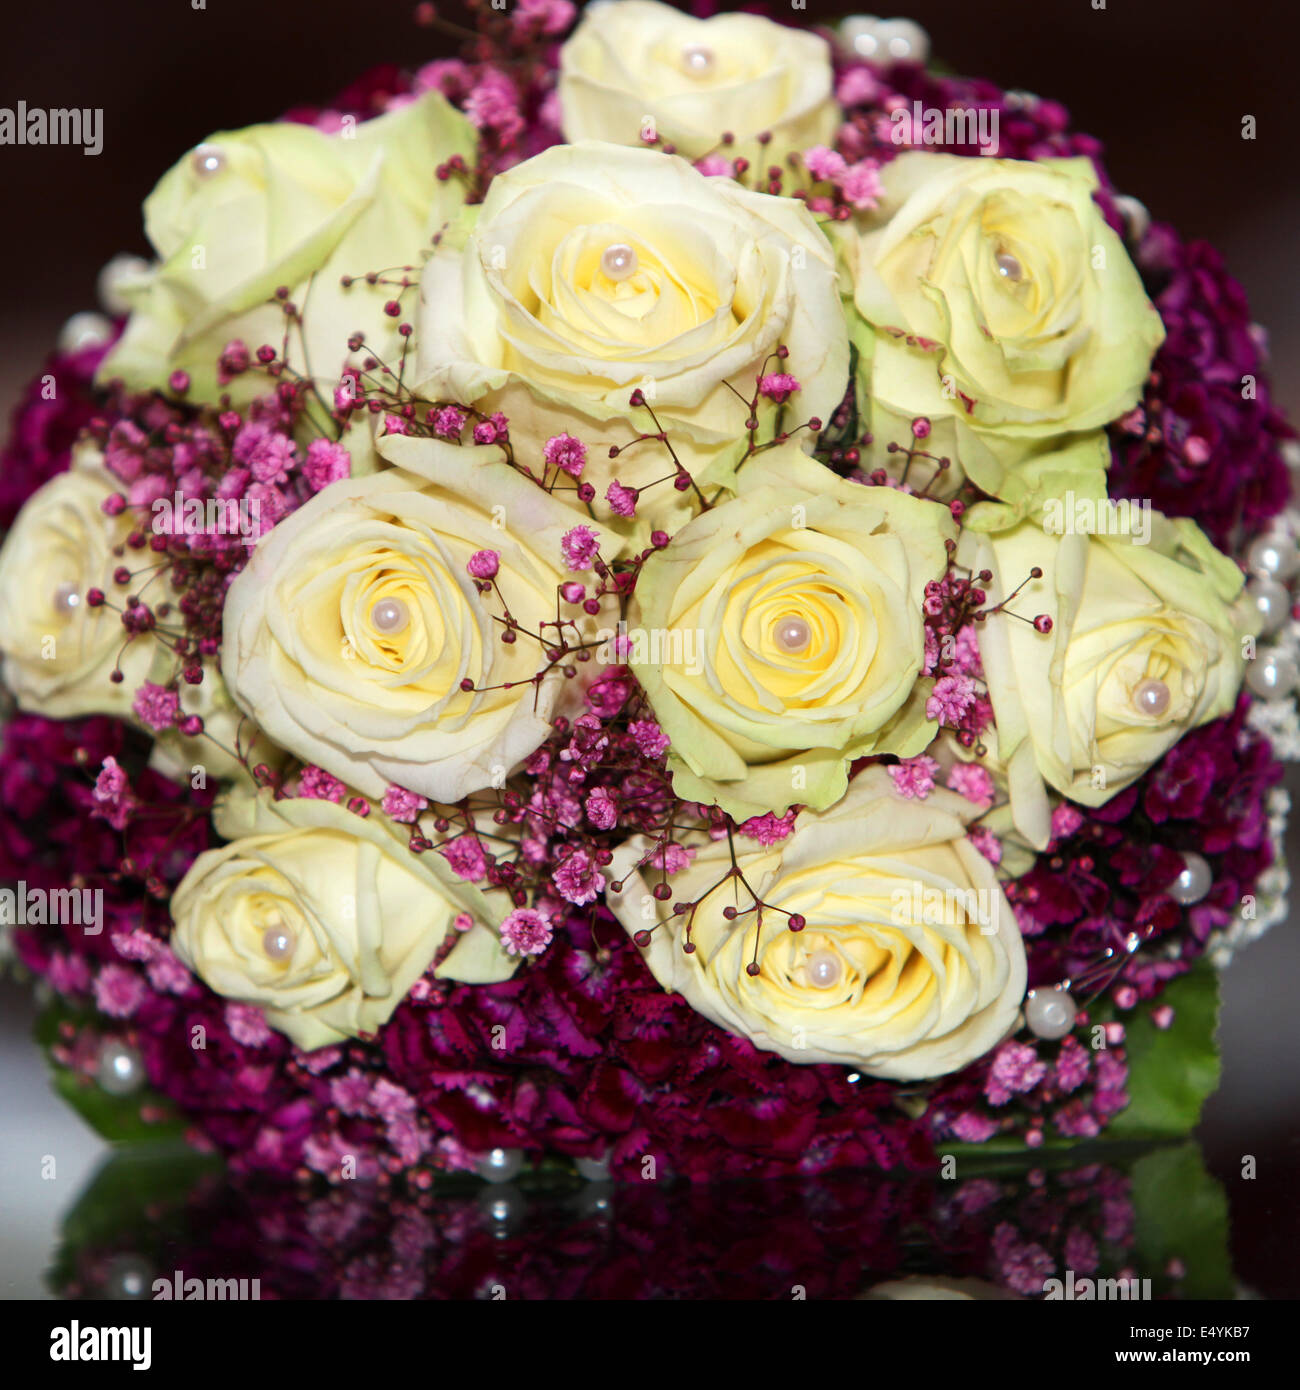 Bridal bouquet with yellow roses Stock Photo